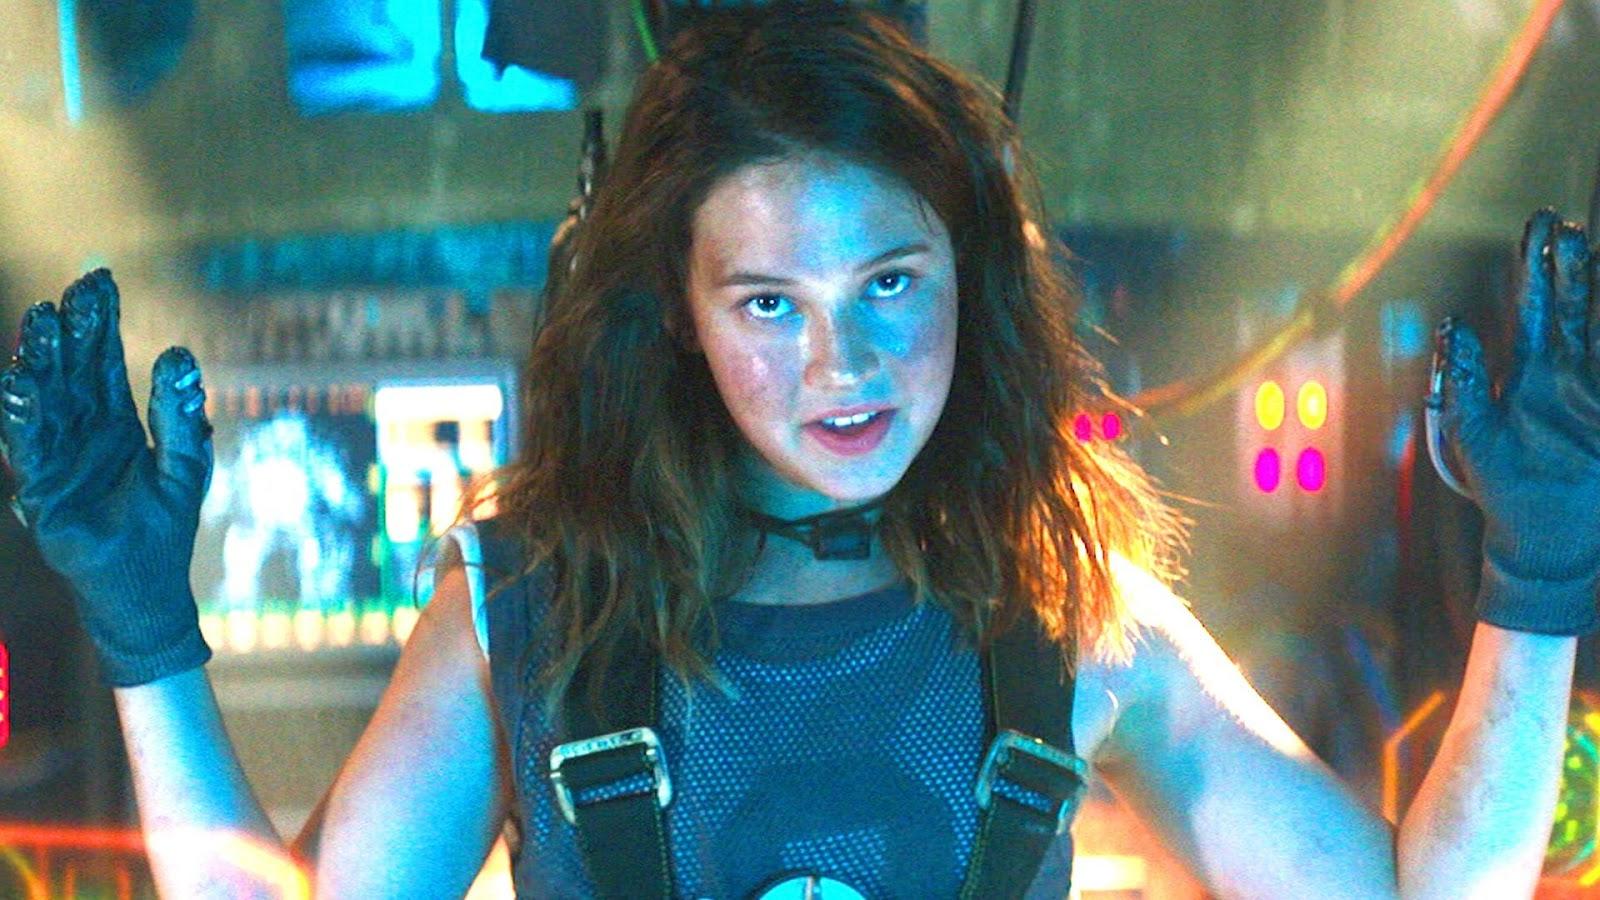 Cailee Spaeny In Pacific Rim Uprising Wallpapers